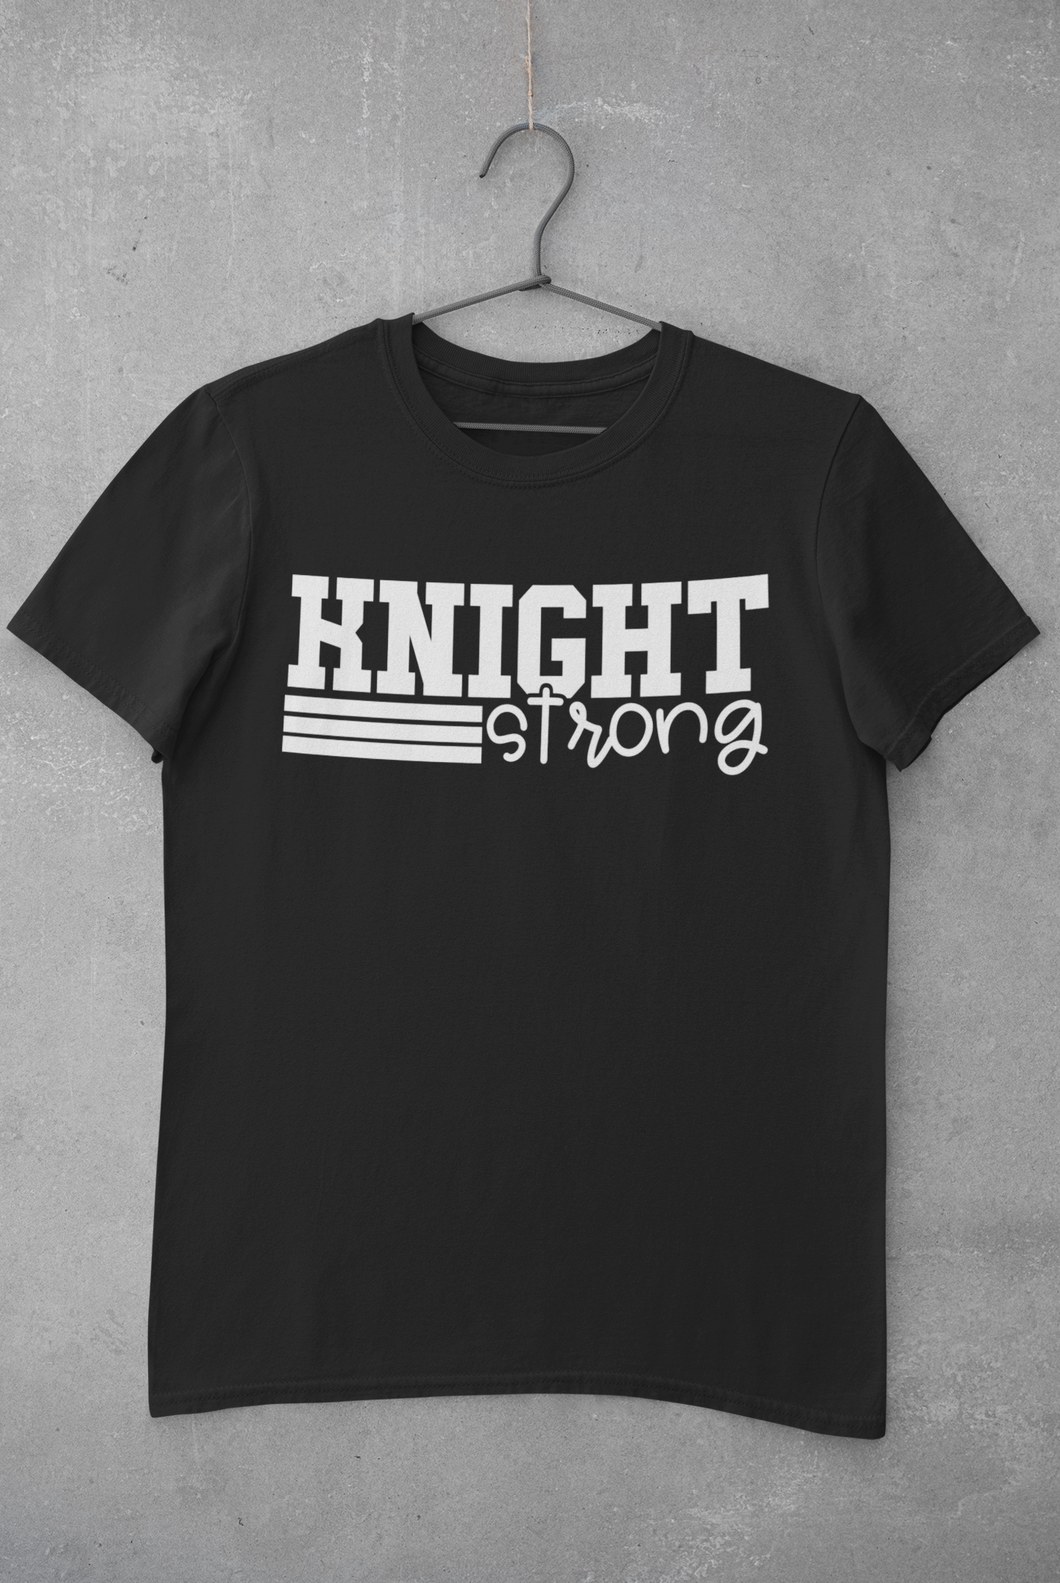 Knights Strong Tee